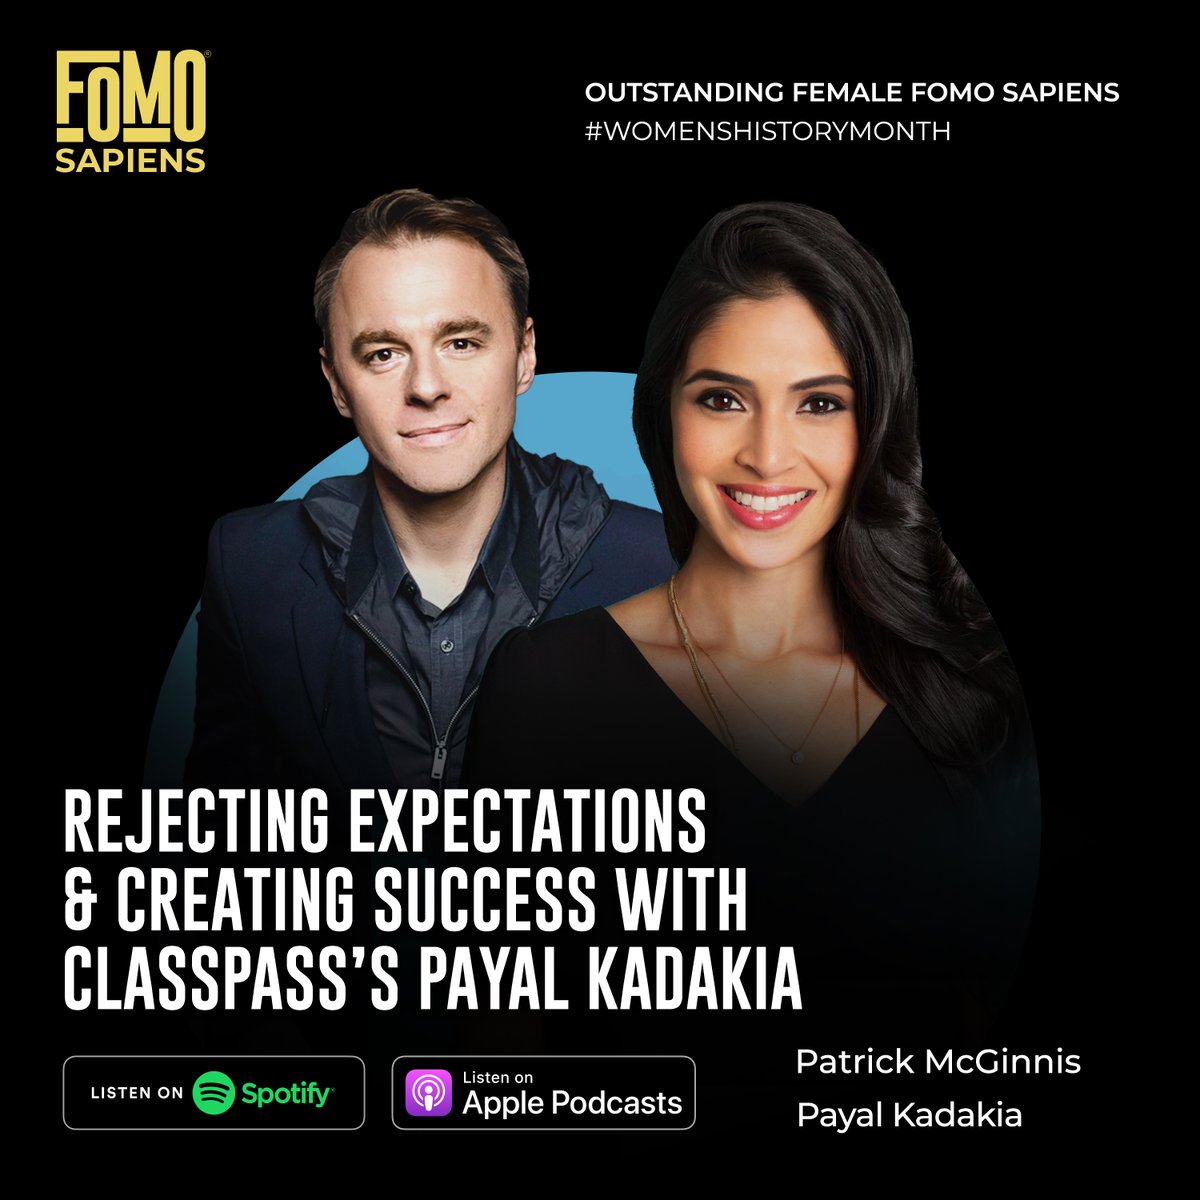 Have you signed up for @classpass yet? This app is inspiring people to live their best lives by connecting them with the best wellness classes and boutique fitness experiences. @payalkadakia joins the #FOMOSapiens podcast this week for some real talk! bit.ly/3wMQ6ZR